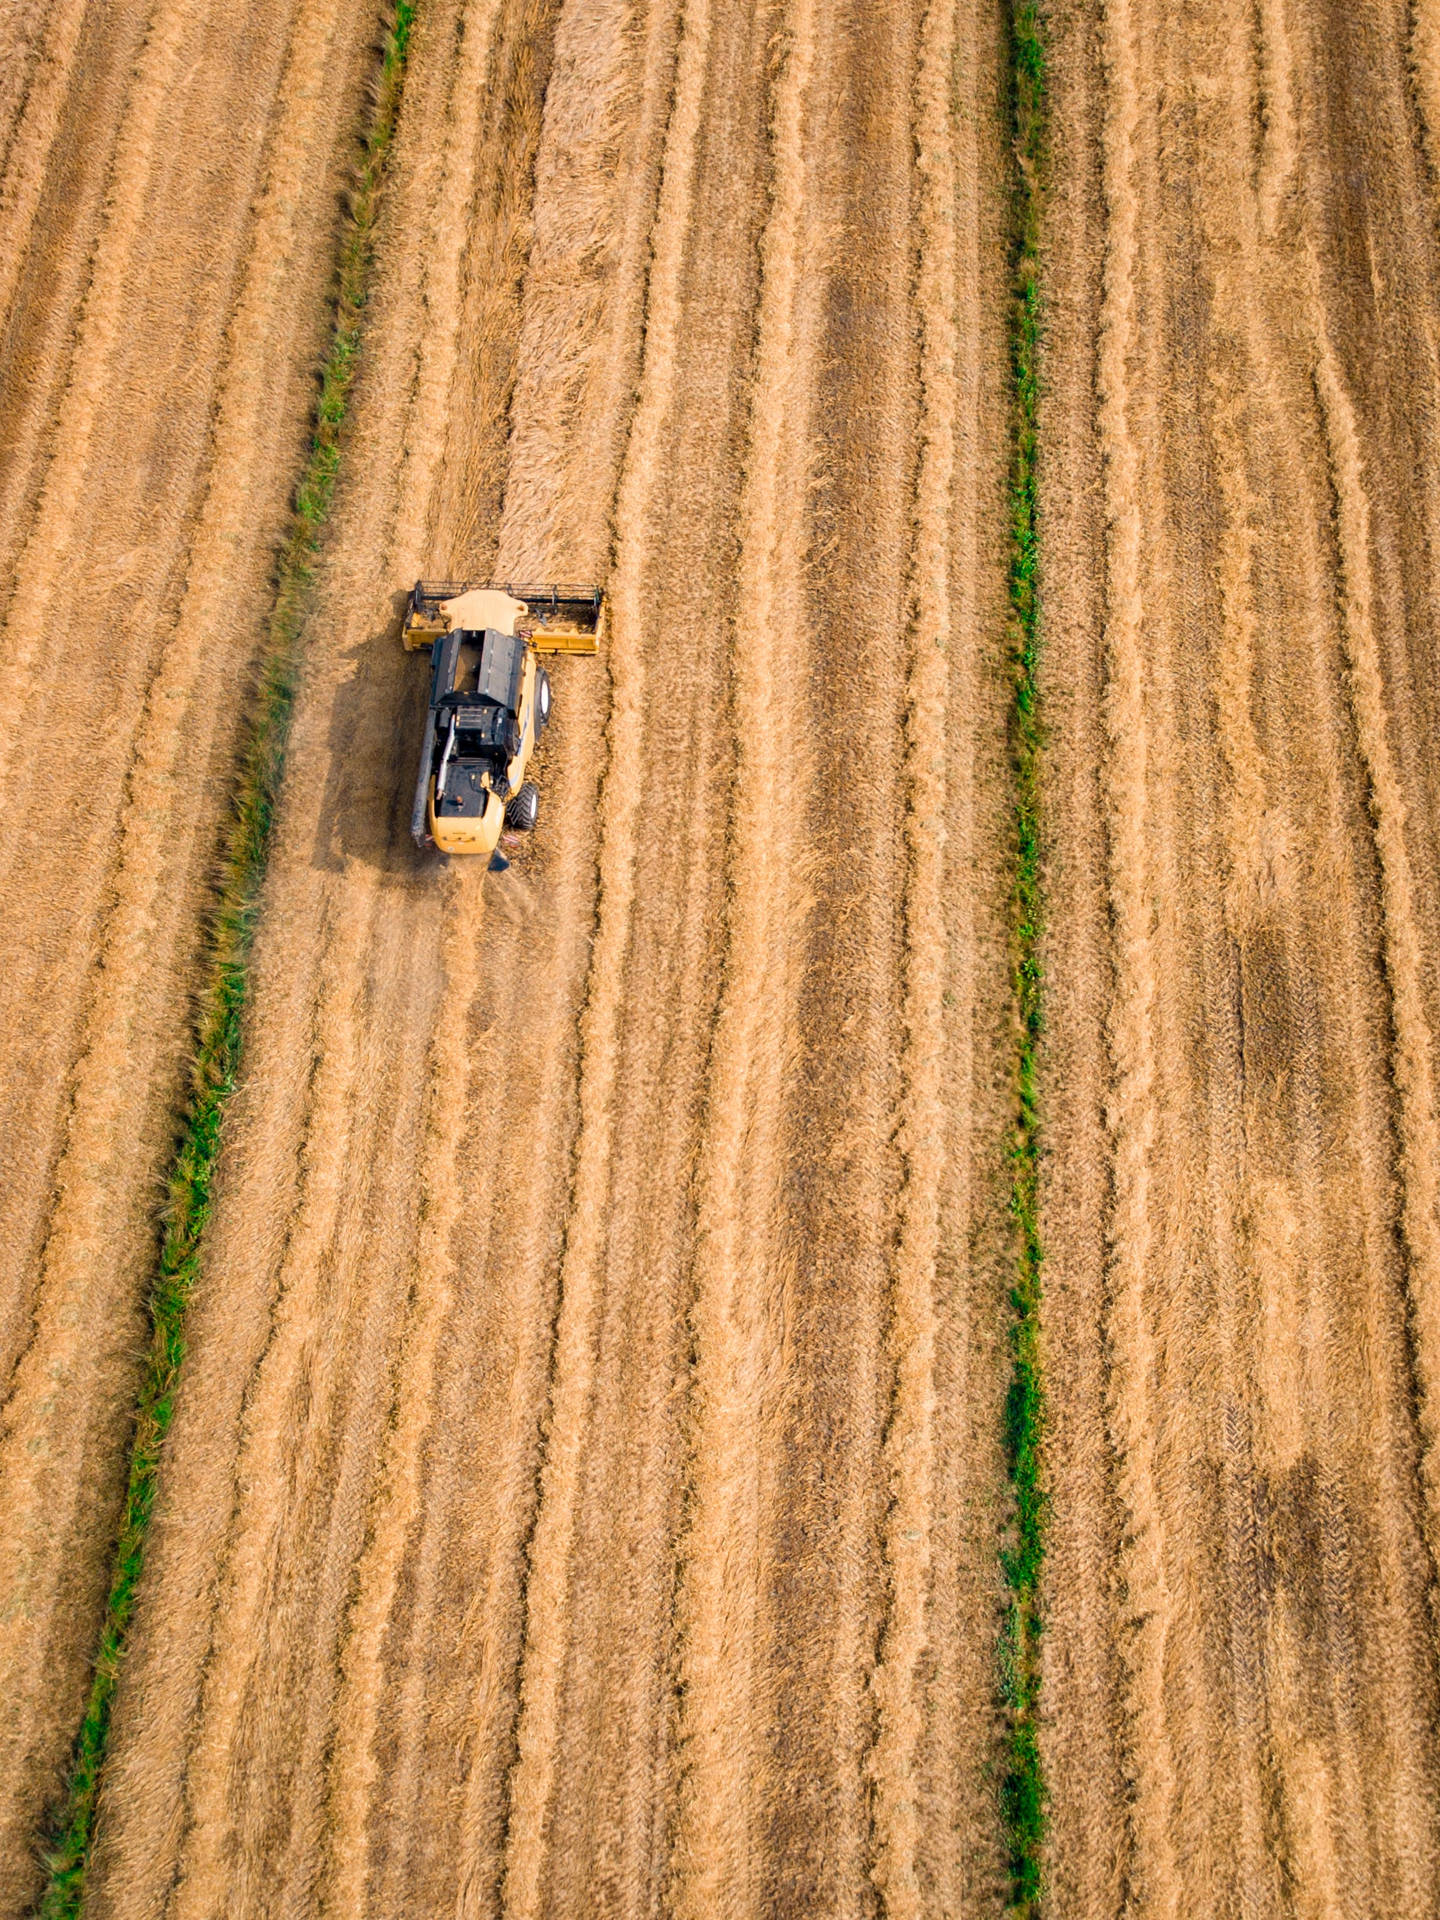 Harvesting Grains From A Farm With Combine Harvester Wallpaper